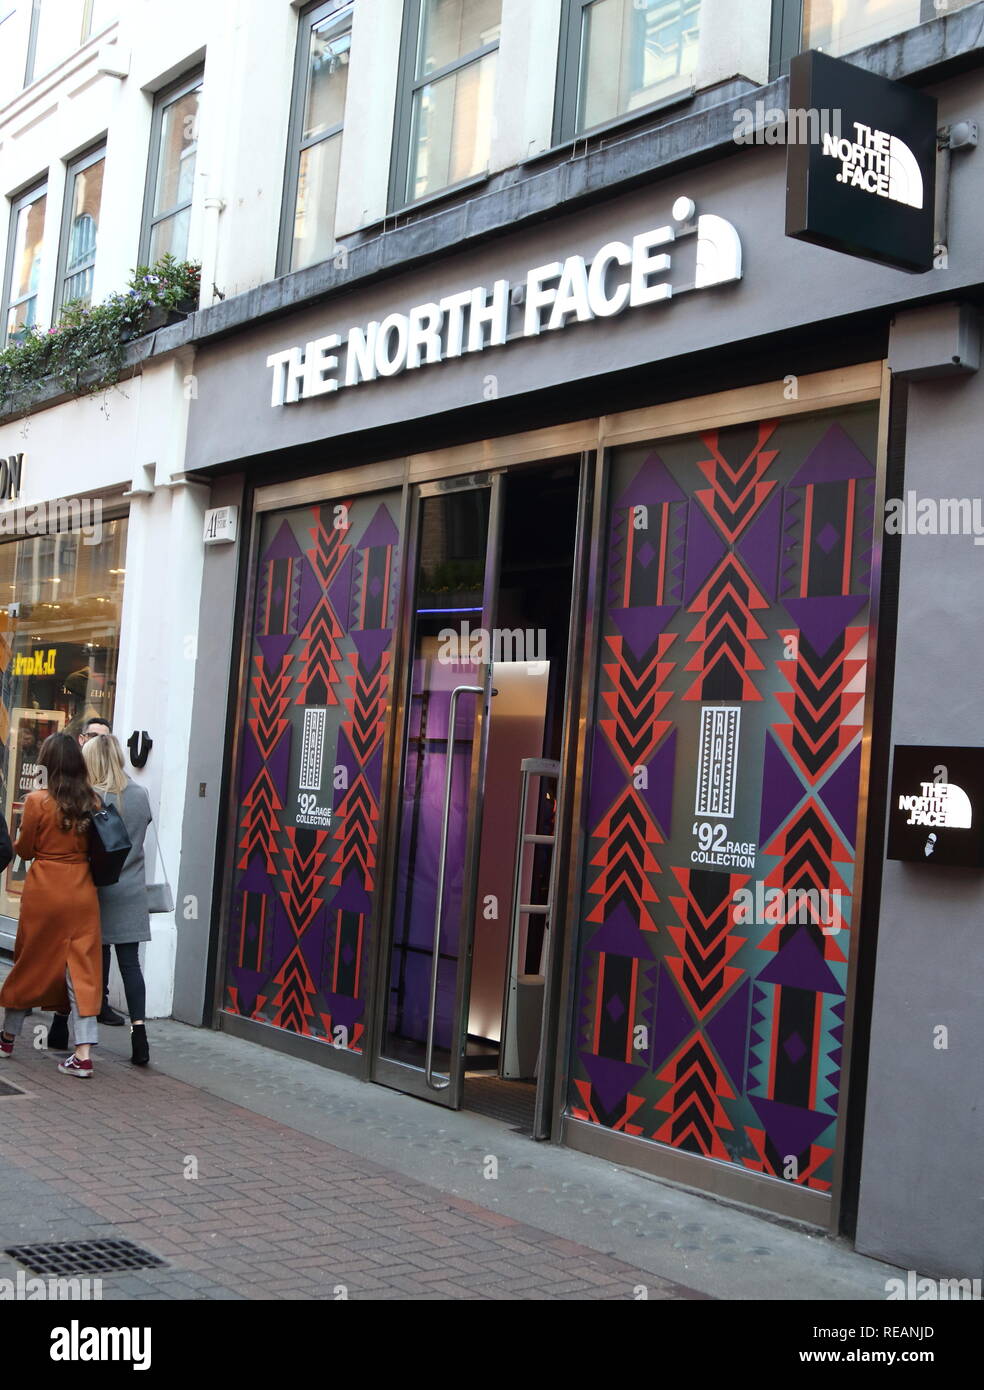 The North Face brand logo seen in Carnaby Street in London, UK Stock ...